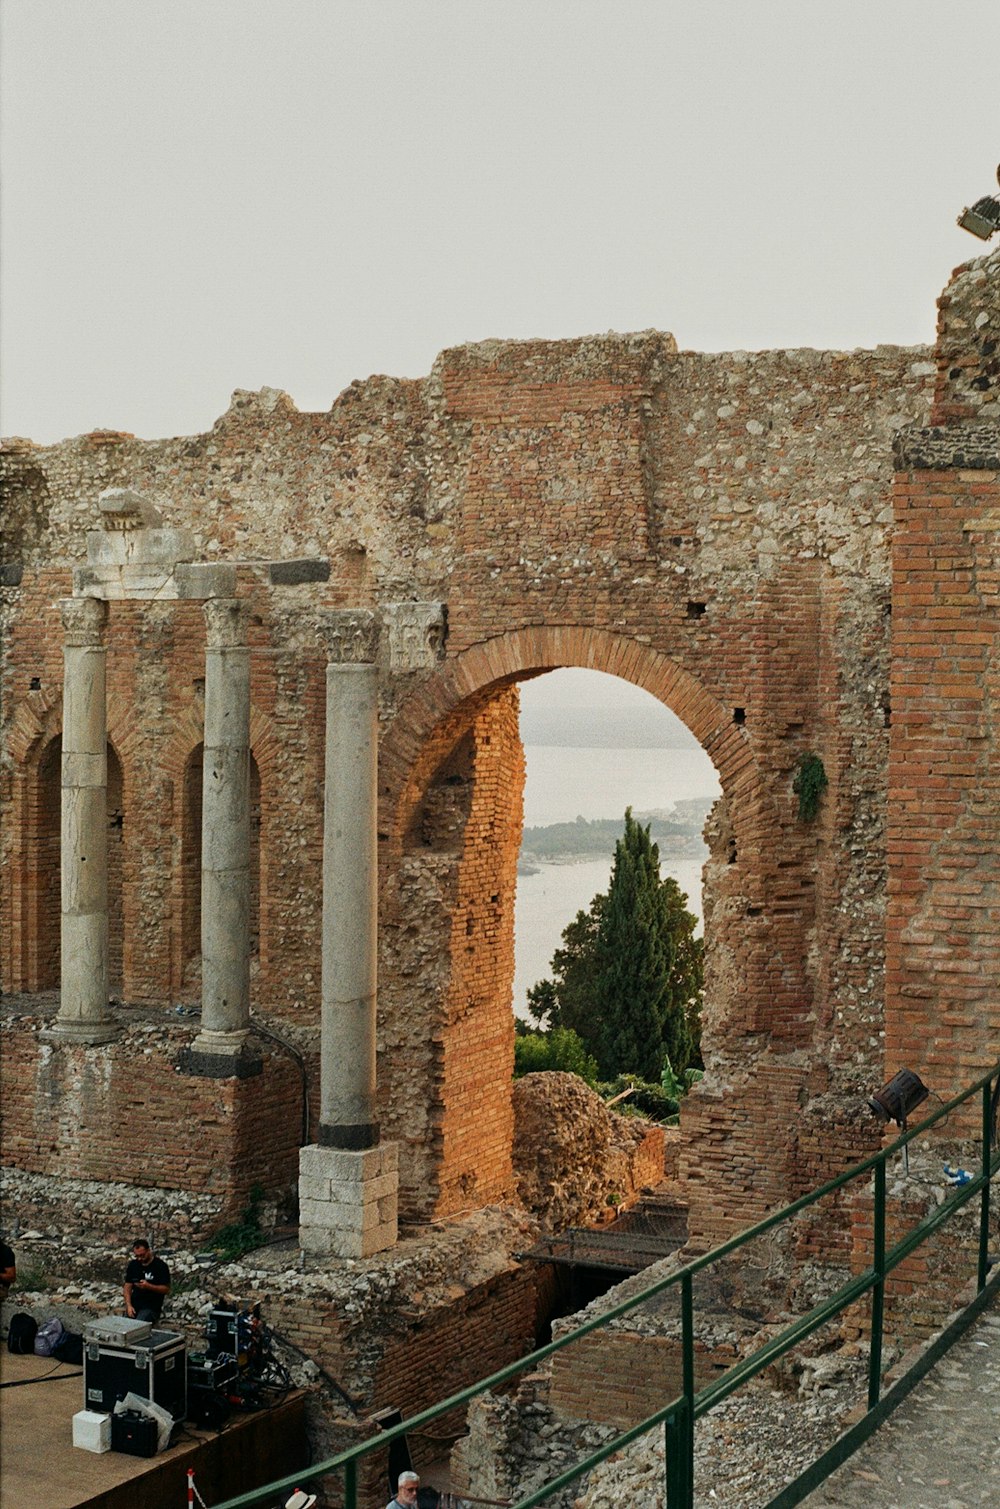 a brick archway with columns